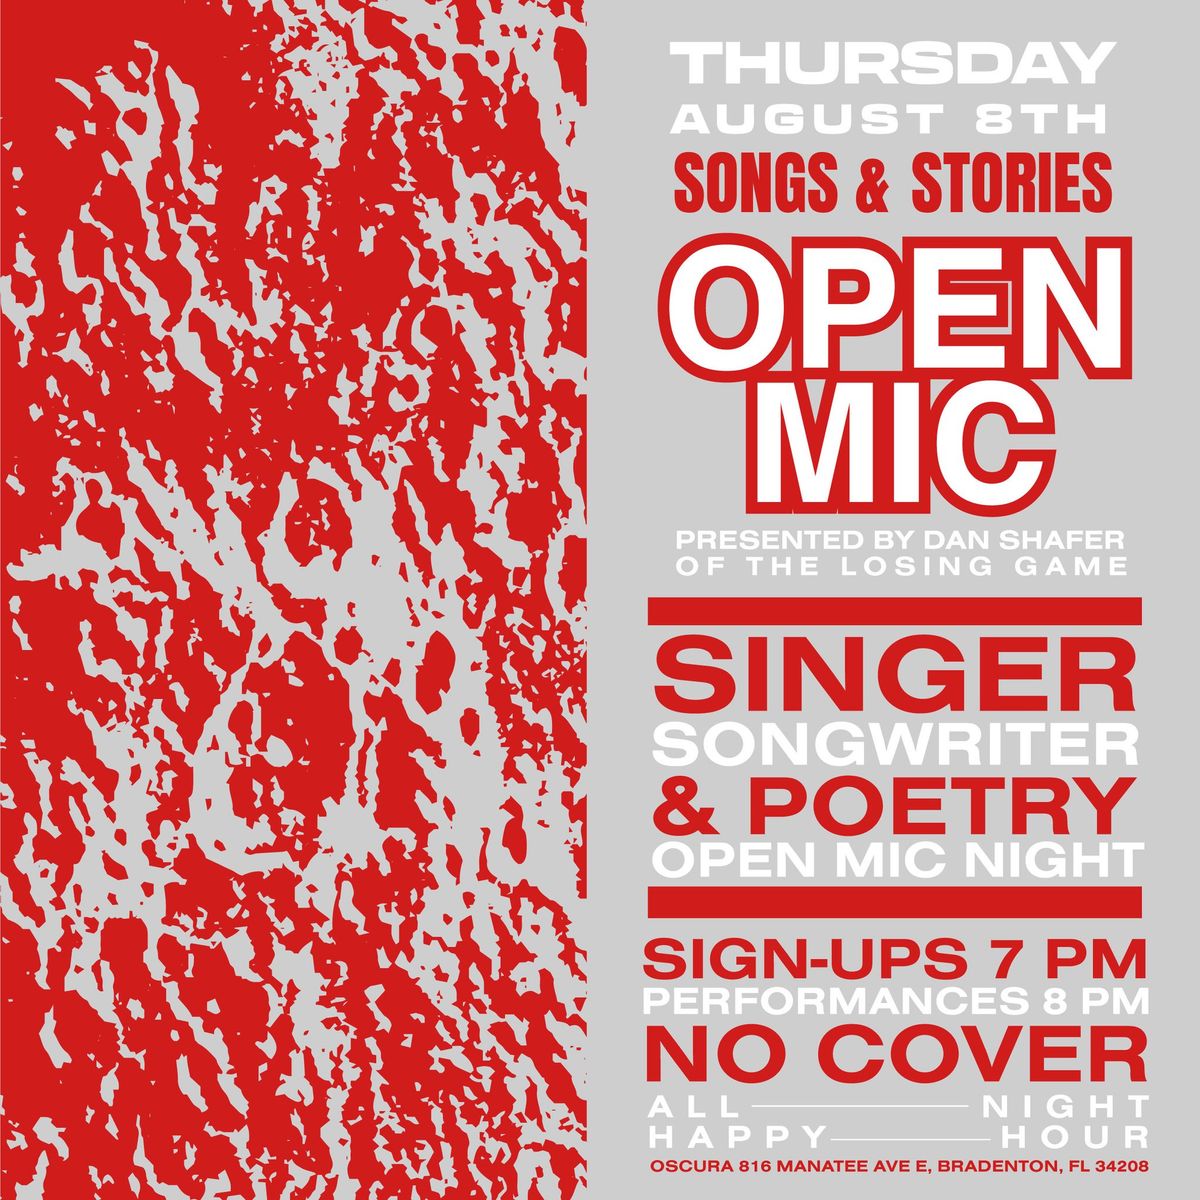 Oscura Open Mic Night - Songs & Stories